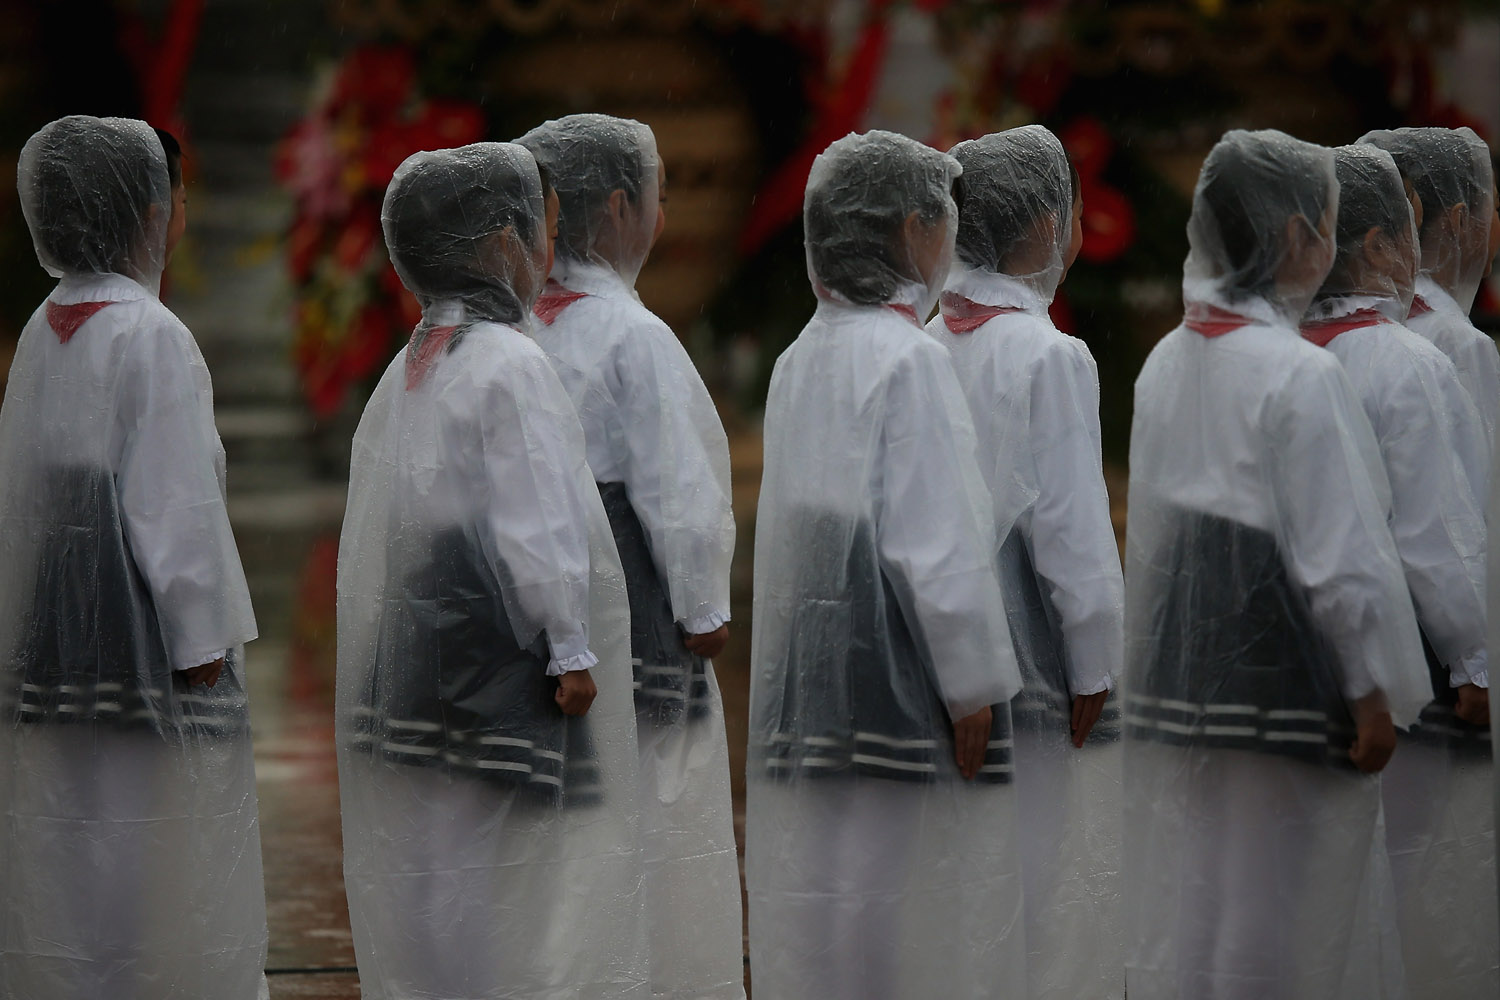 Oct. 1, 2013. Chinese students wearing raincoats perform for a tribute ceremony marking the 64th anniversary of the founding of the People's Republic of China at Tiananmen Square in Beijing.